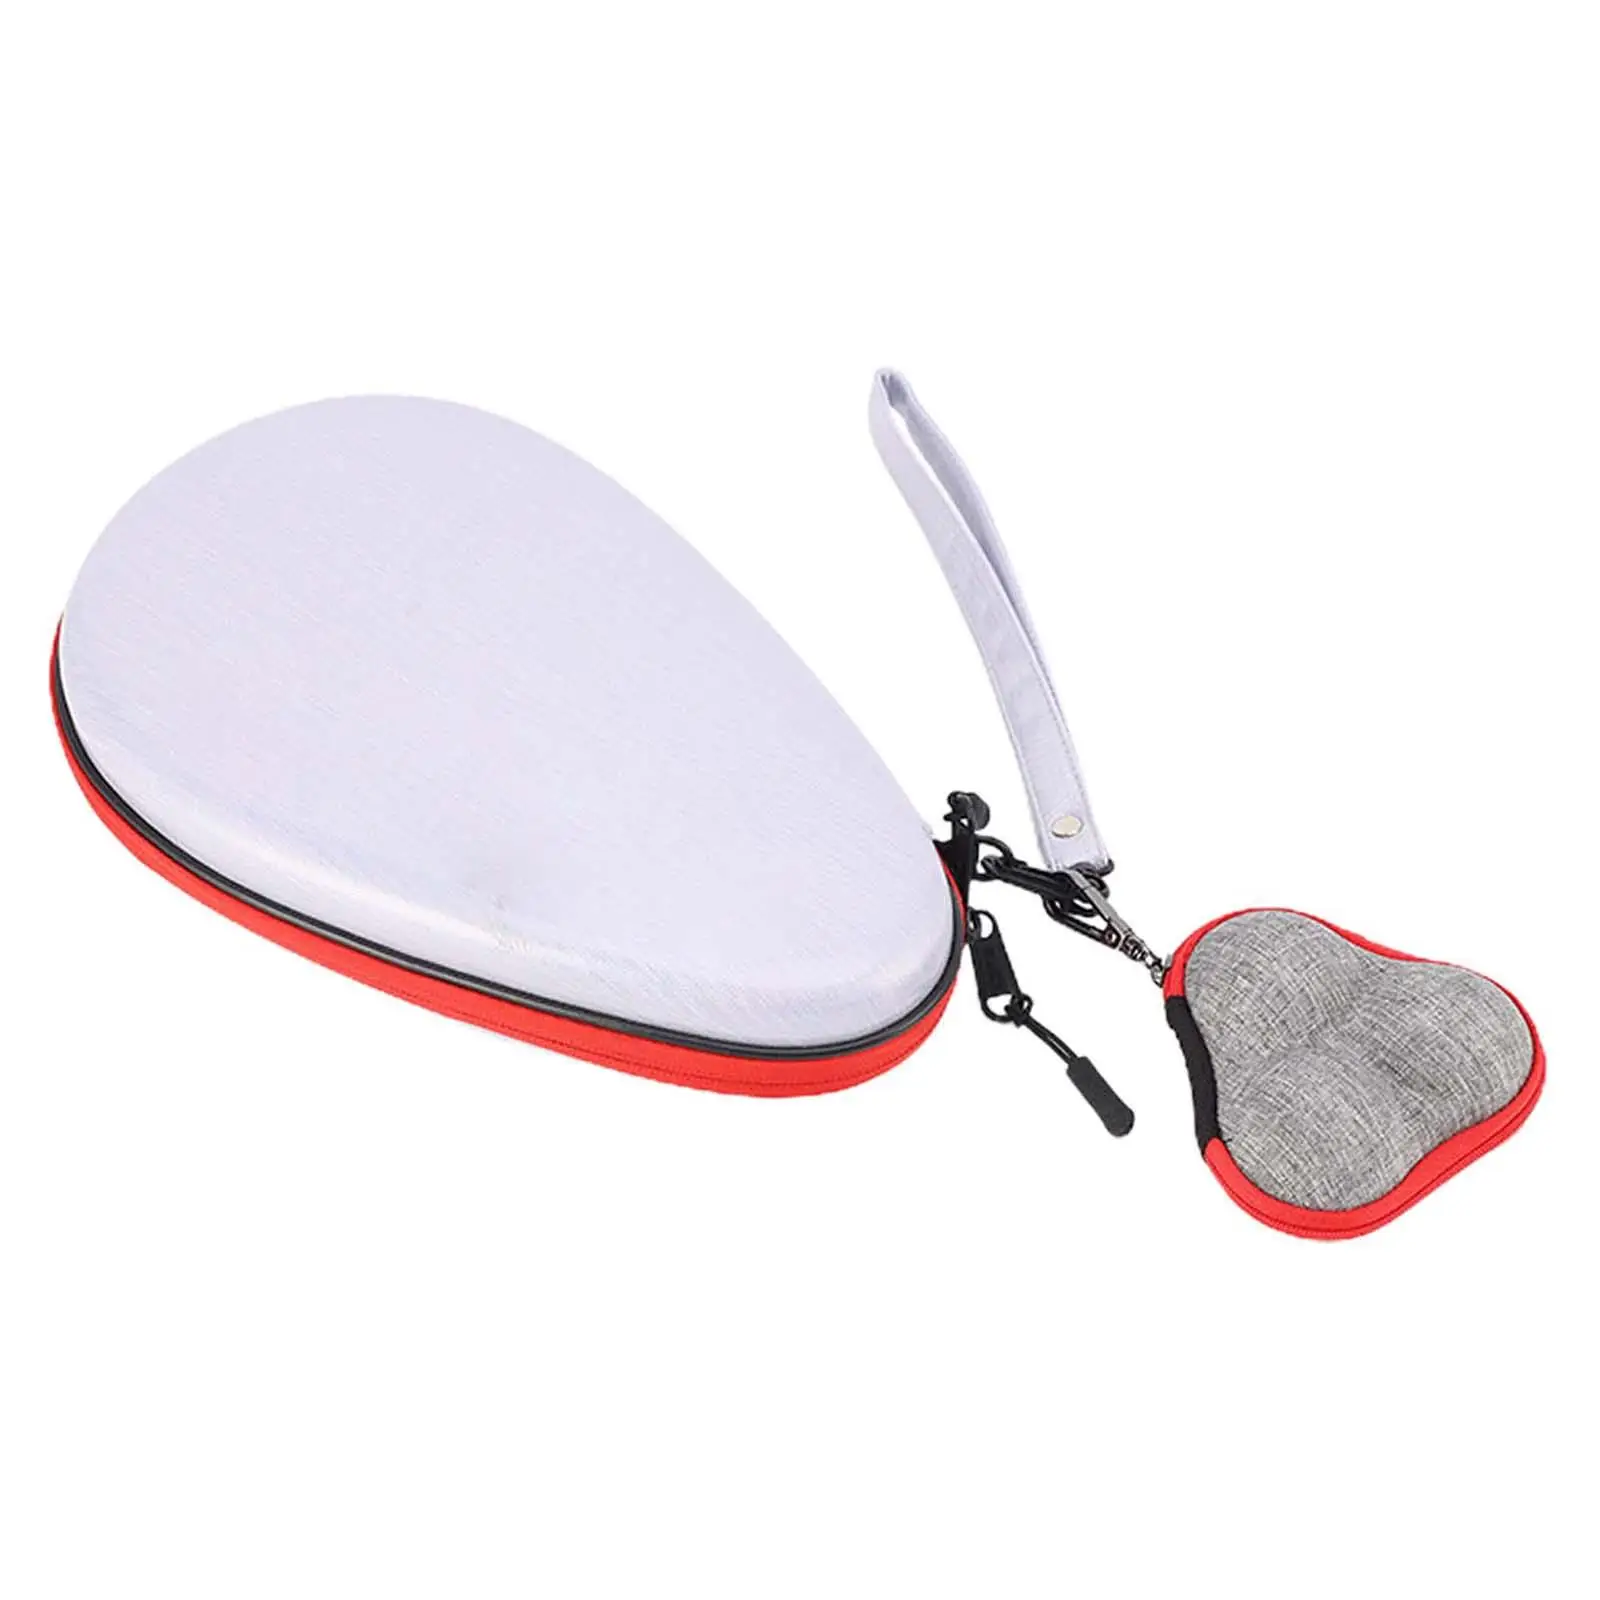 Pingpong Bag Portable with Ball Case Protector for Unisex Adult Competition